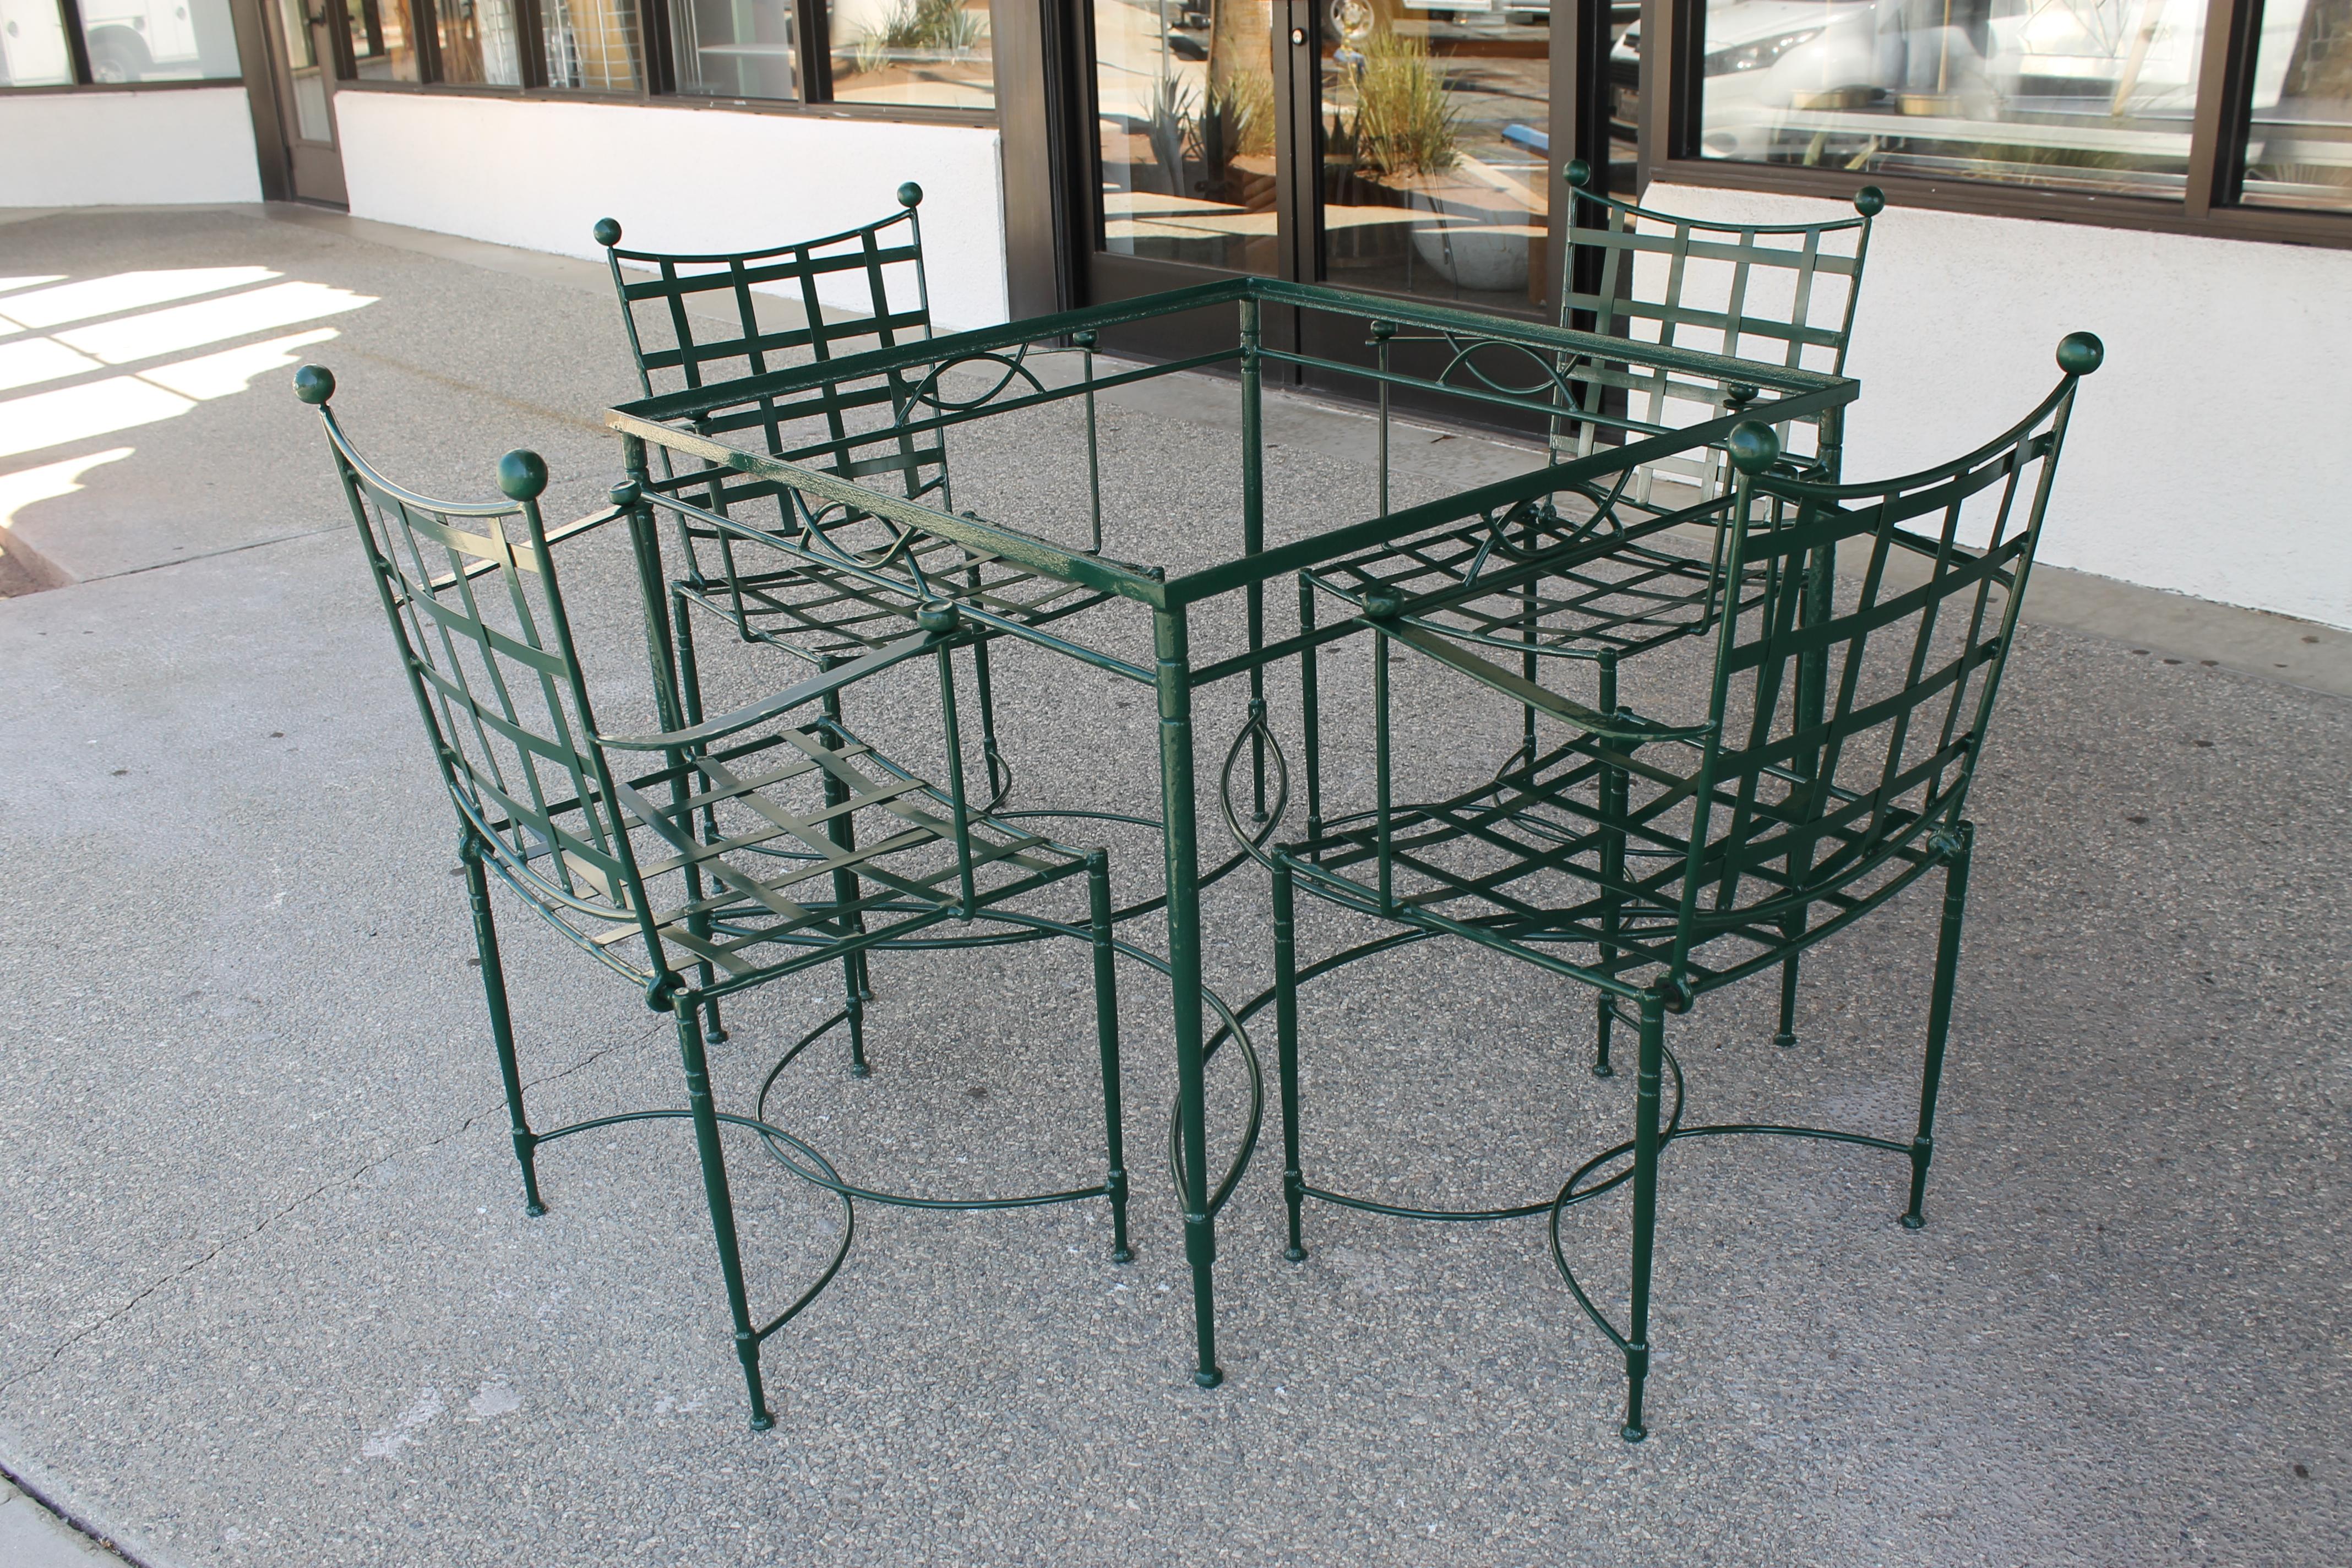 Table and four dining chairs by Mario Papperzini for Salterini. Table with glass top measures 35.5